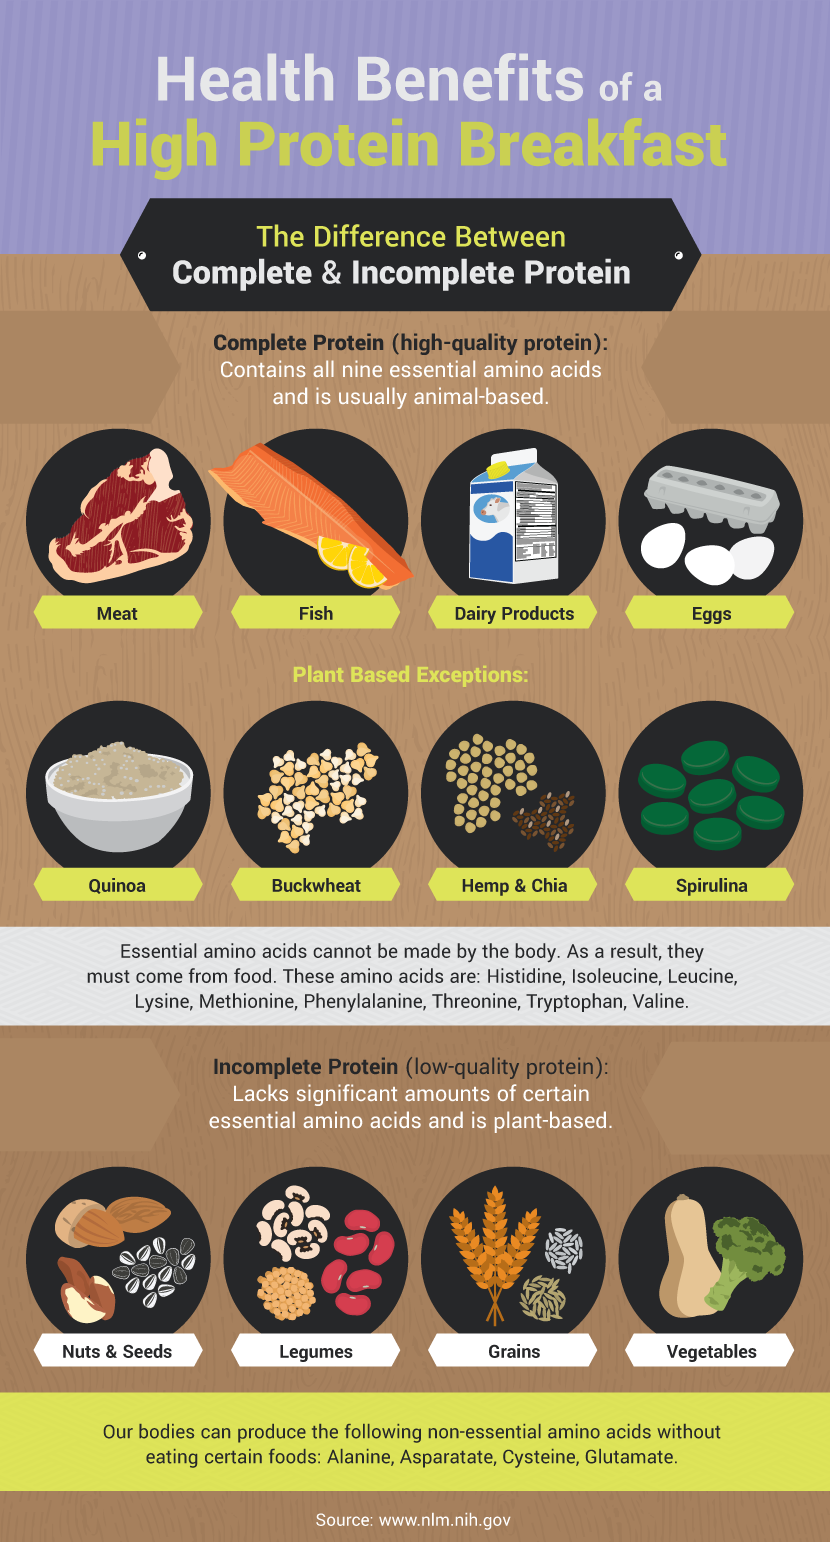 Complete and Incomplete Proteins - Health Benefits of a High-Protein Breakfast